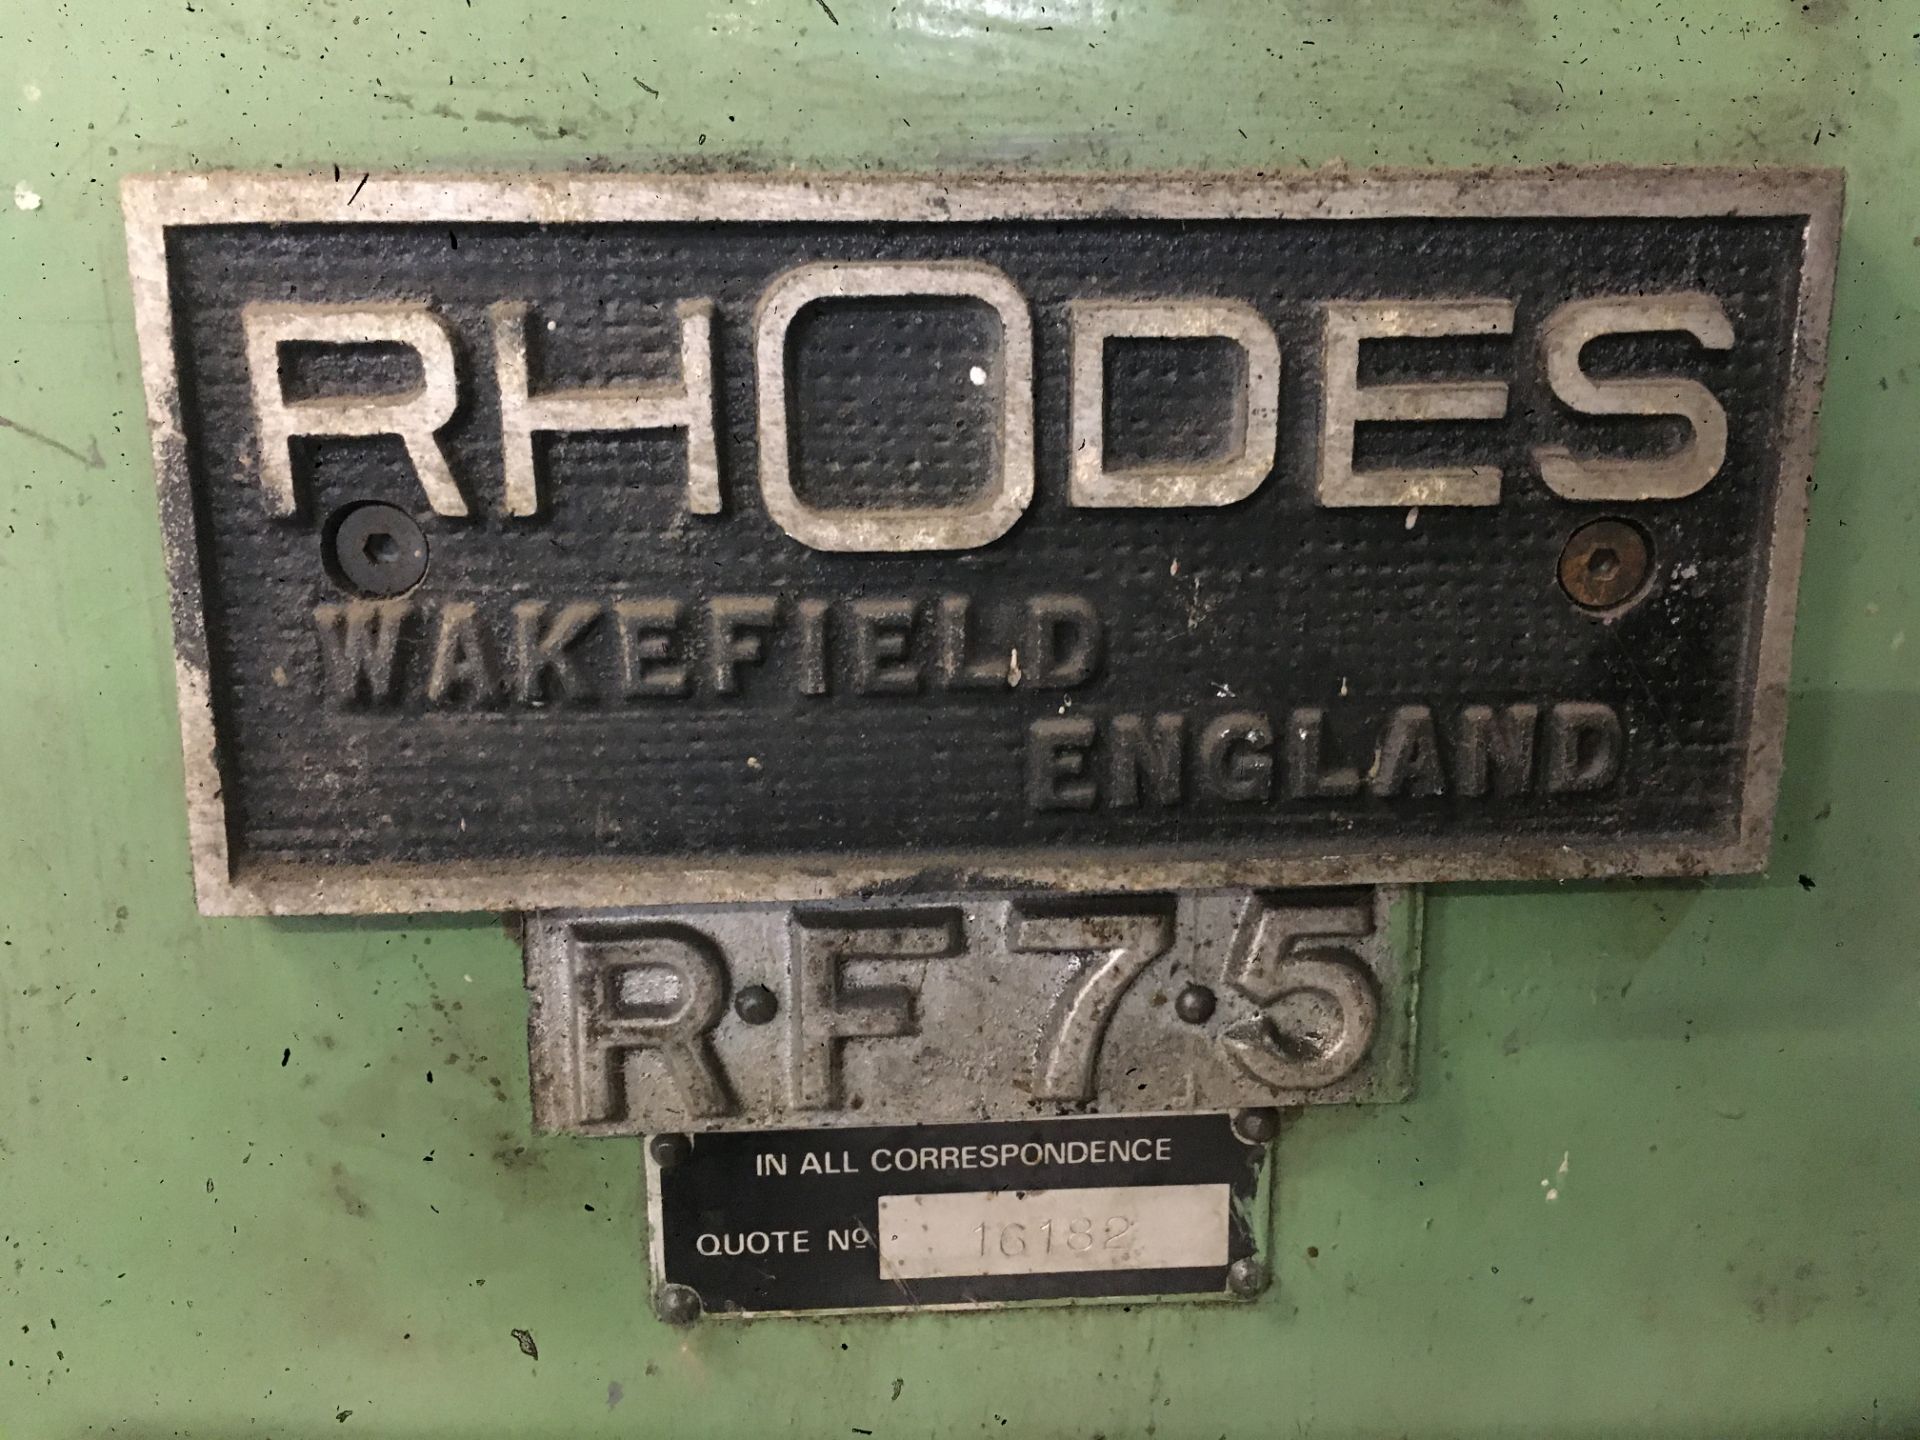 Rhodes RF75 mechanical press, Serial No. 16182, Ref. 204R, Capacity. 75 ton, Bed Size. 119cm x - Image 3 of 3